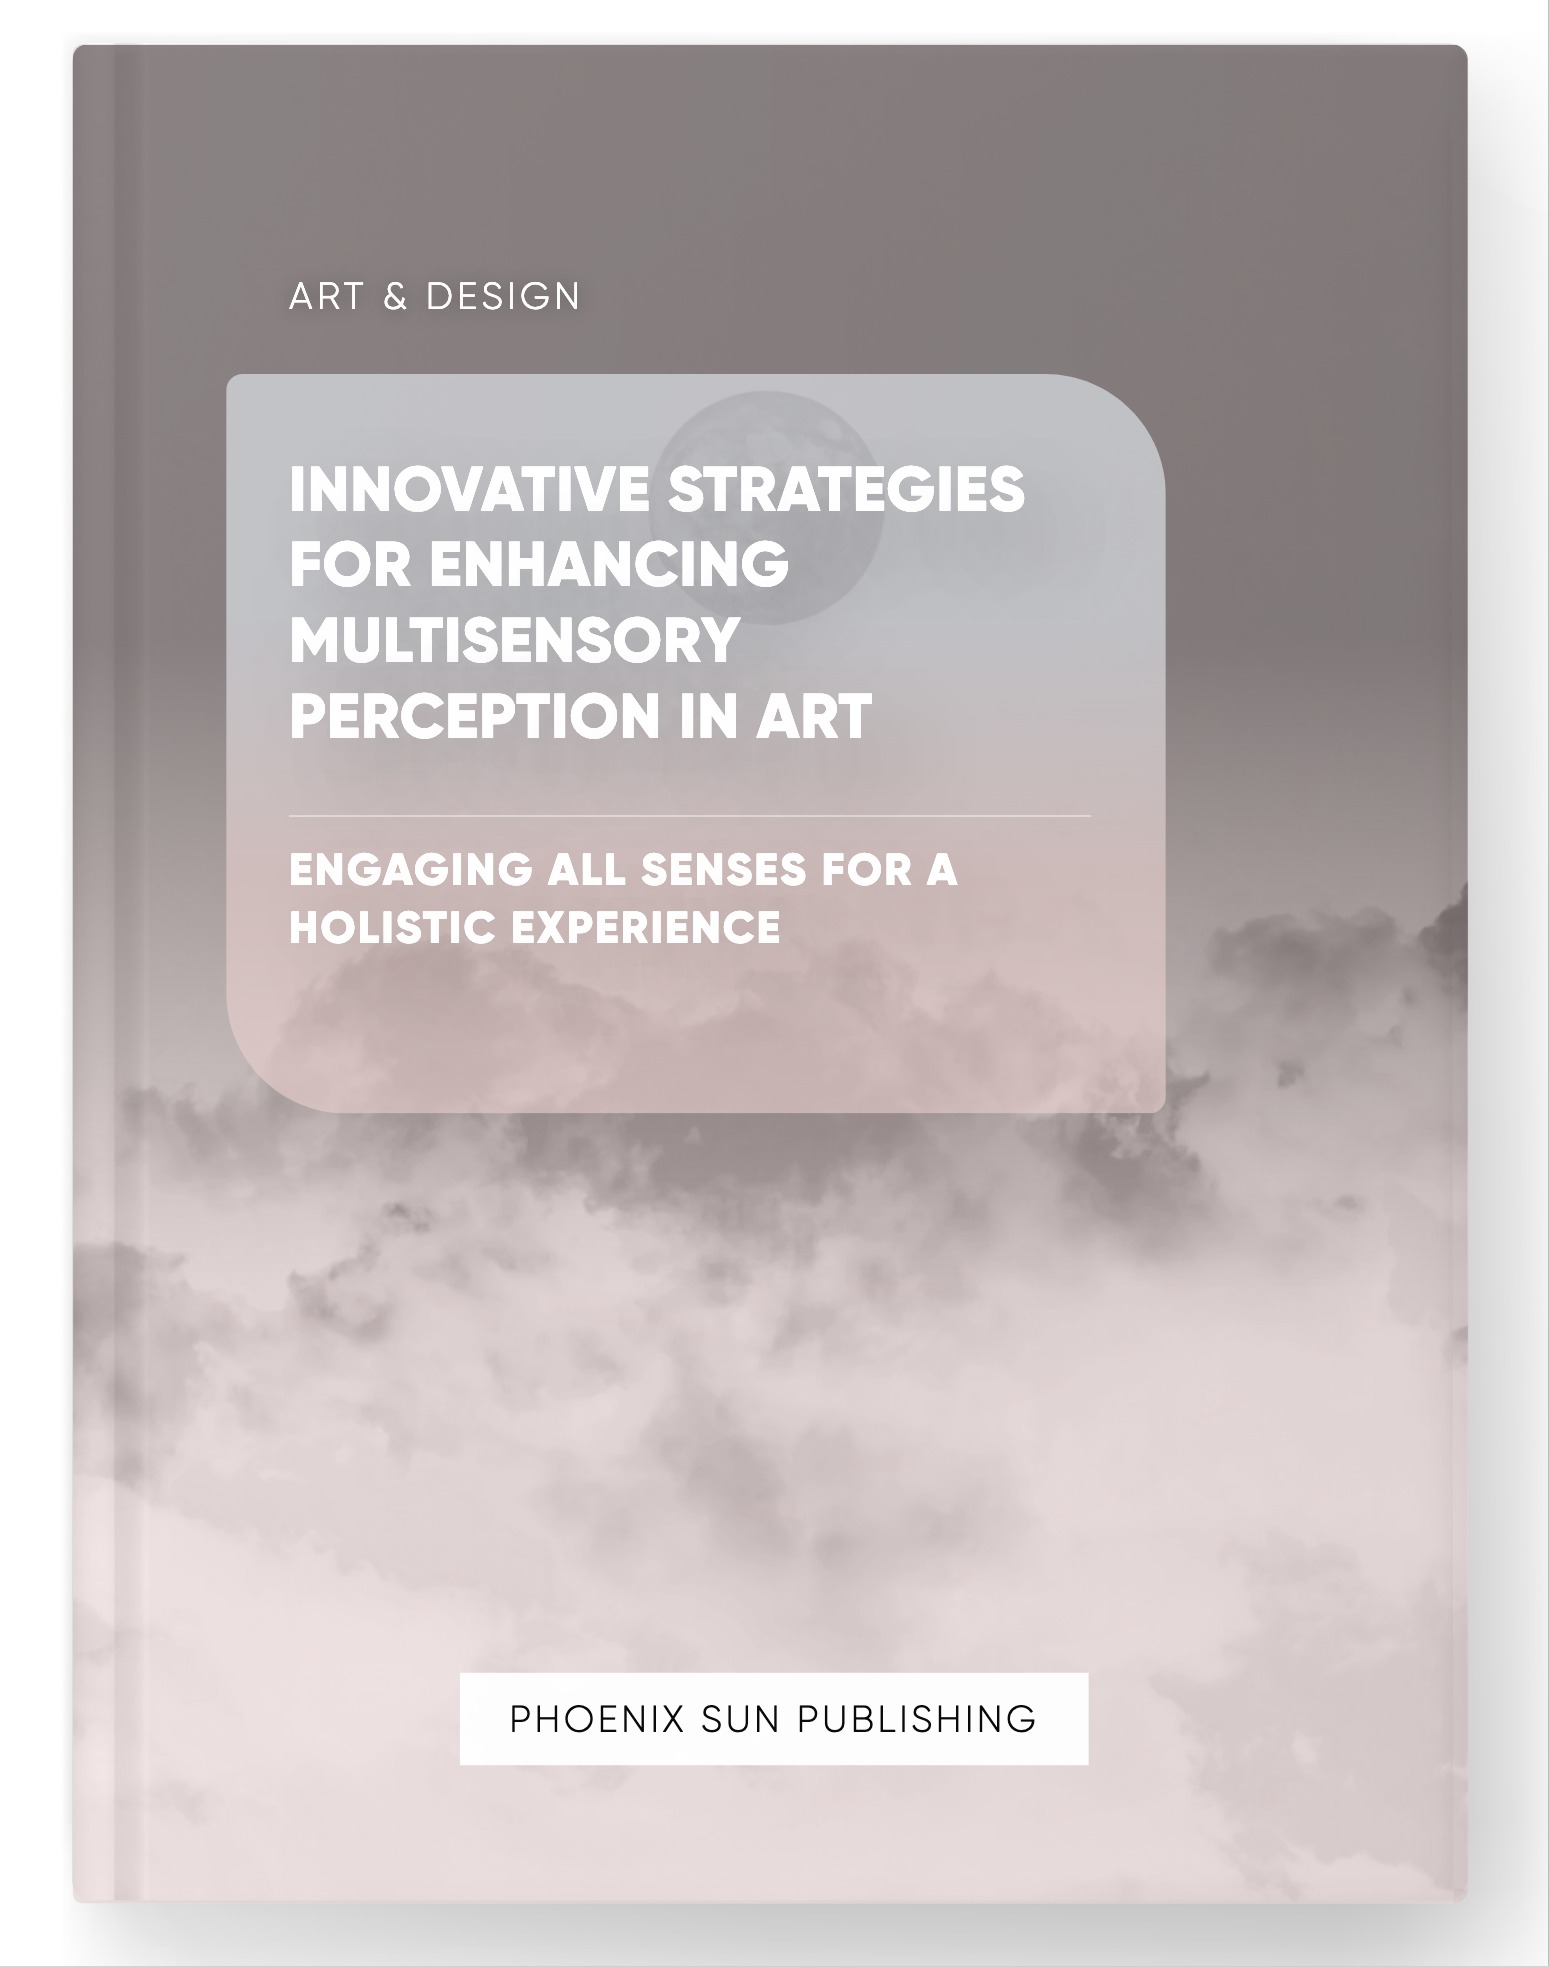 Innovative Strategies for Enhancing Multisensory Perception in Art – Engaging All Senses for a Holistic Experience